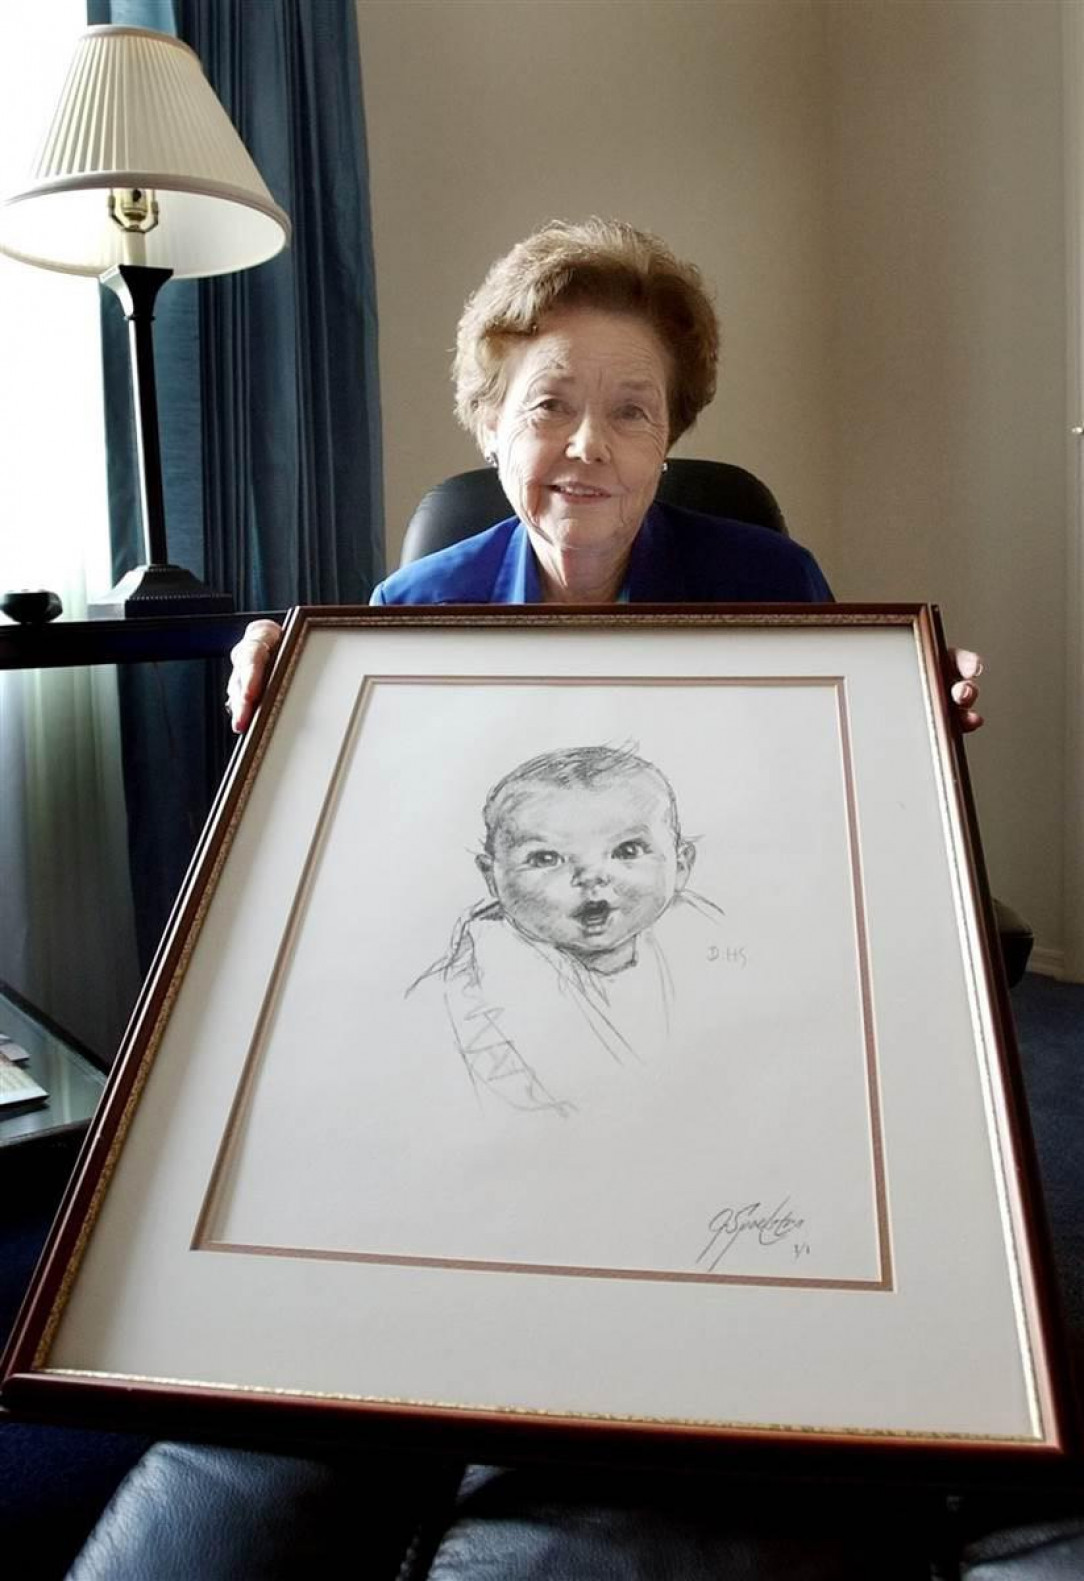 The Gerber baby turns 95 🤩